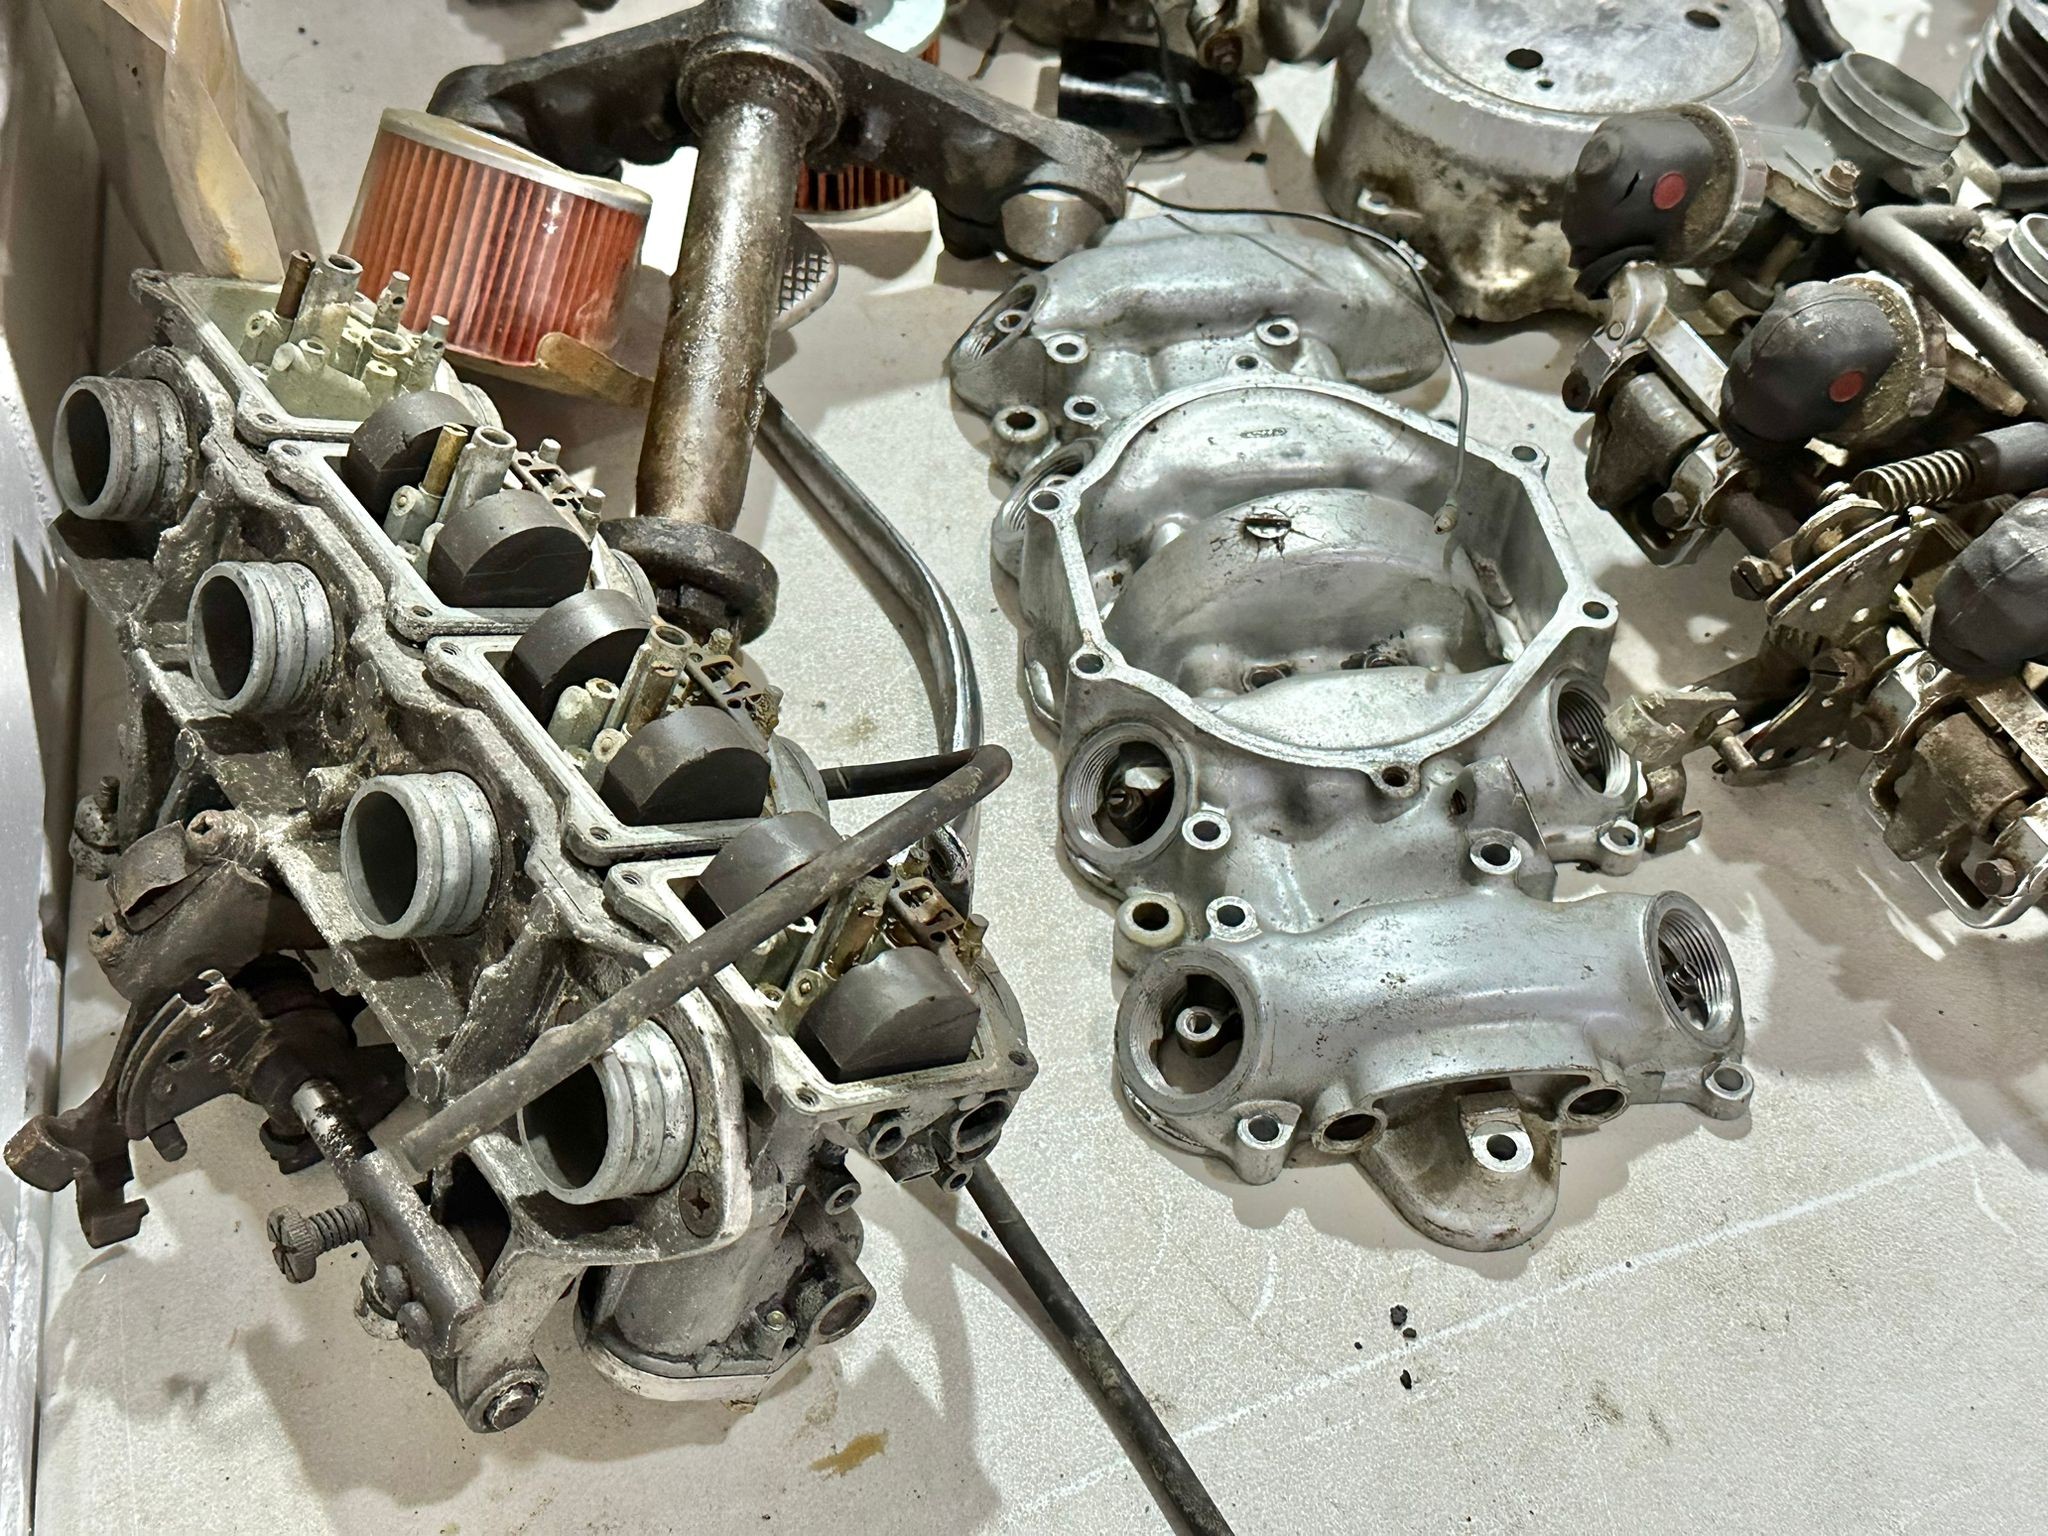 Honda CB500-4 parts with engine - Image 15 of 20